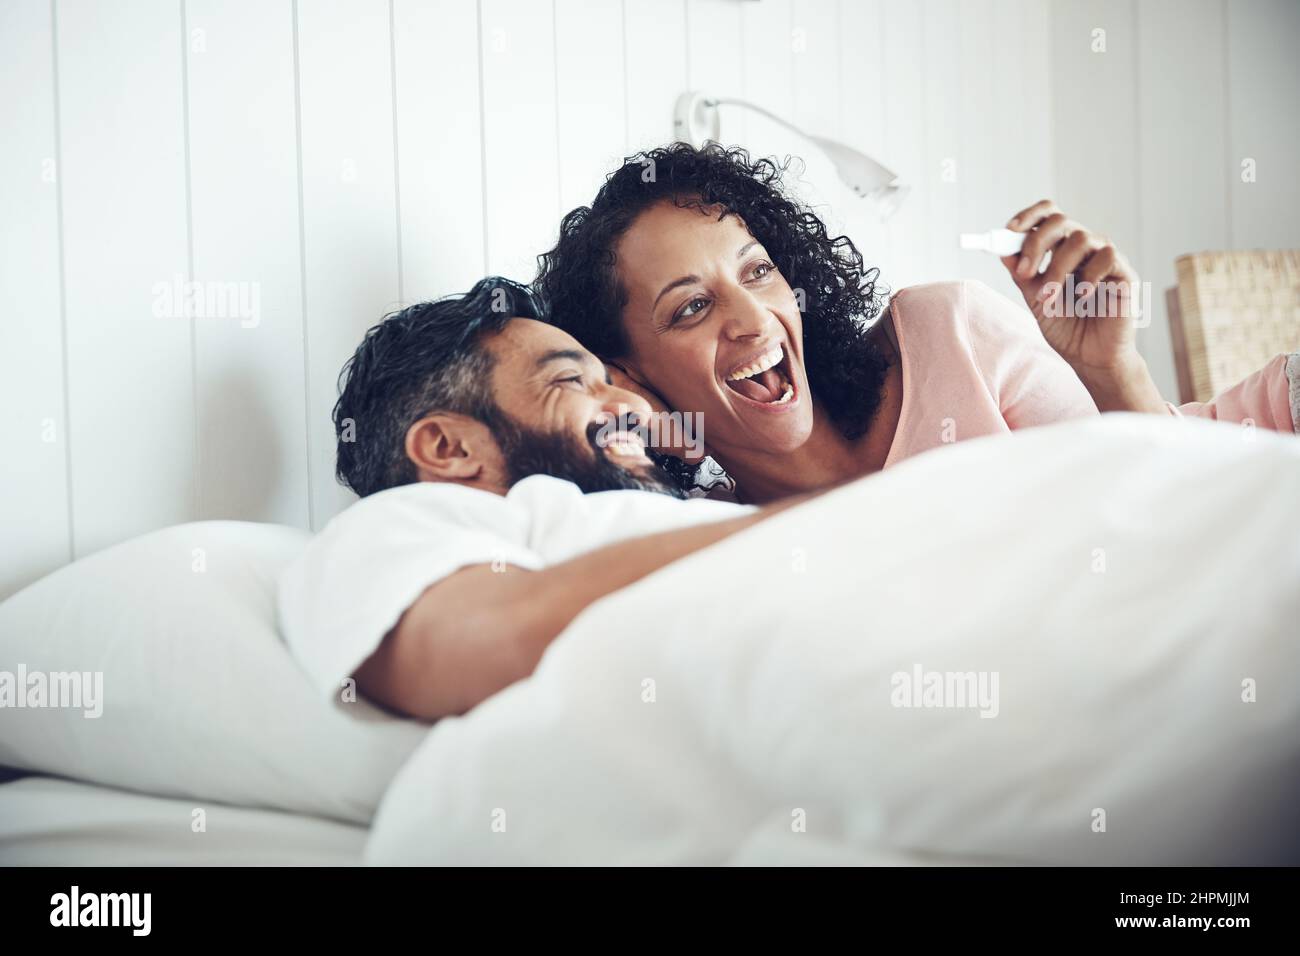 Oh baby, were having a baby. Shot of a mature couple feeling happy after taking a home pregnancy test. Stock Photo